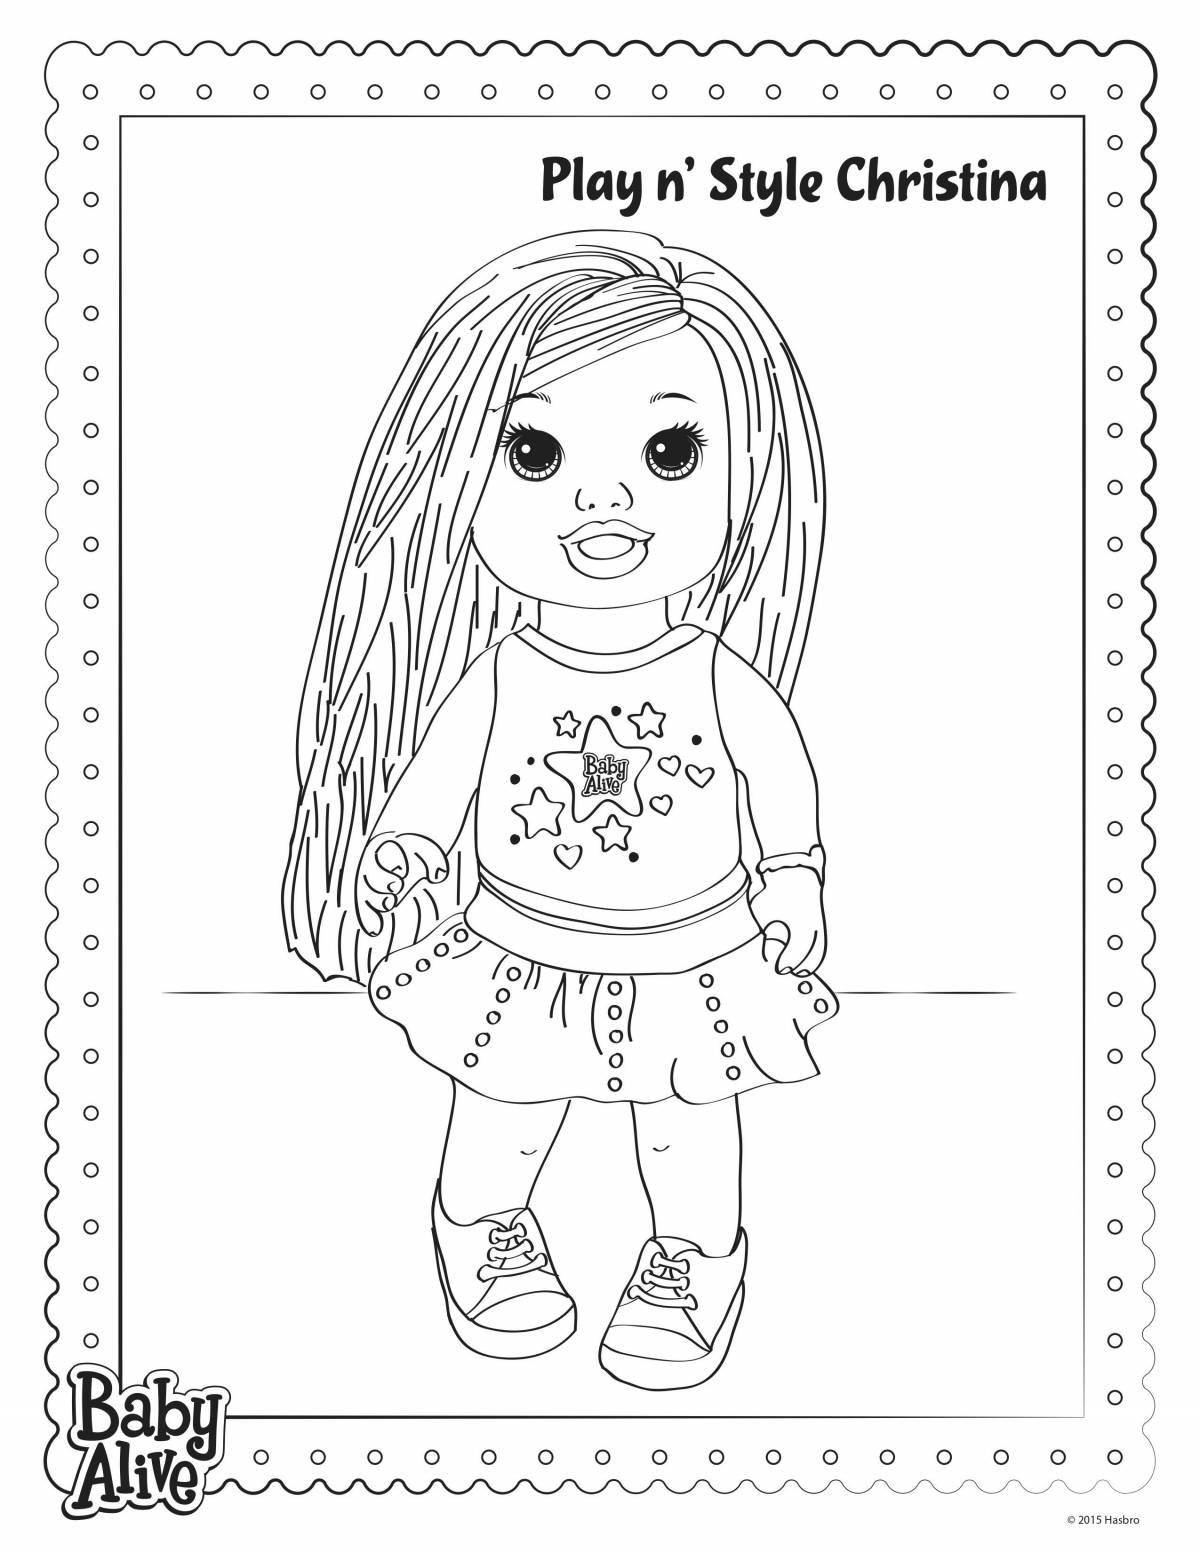 Colorful baby bon coloring page